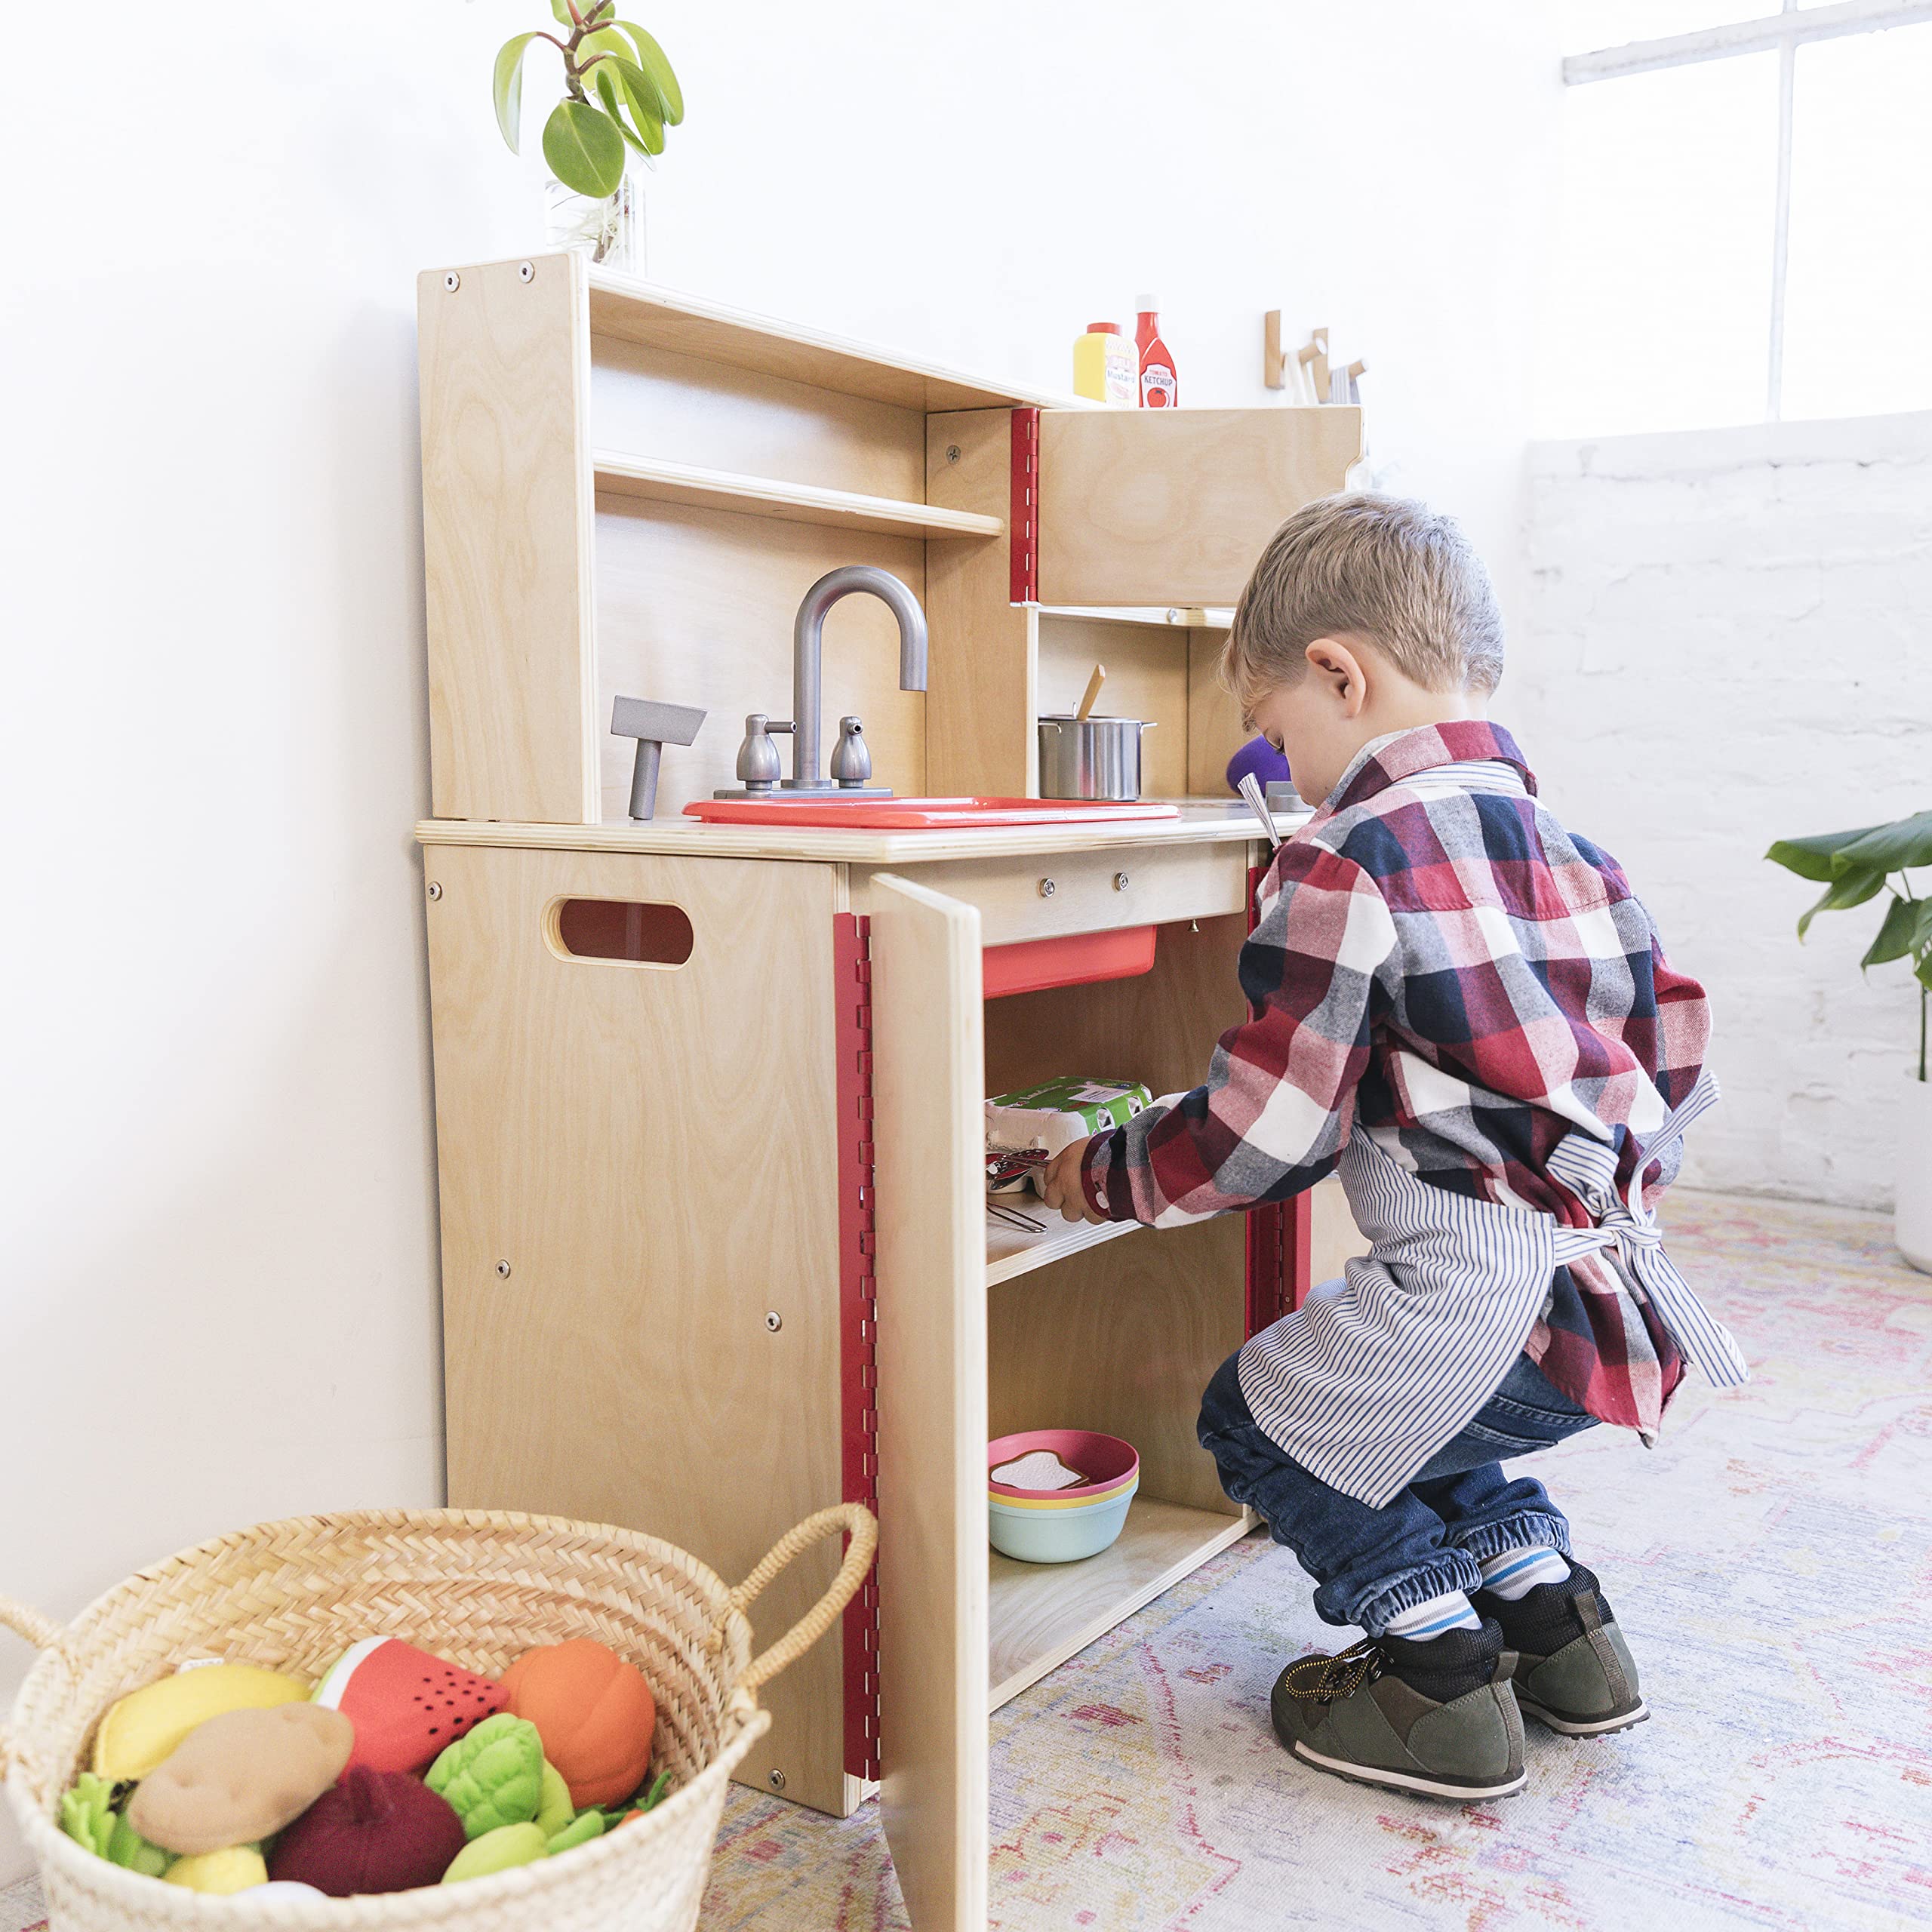 ECR4Kids 4-in-1 Kitchen, Sink, Stove, Oven, Microwave and Storage, Play Kitchen, Natural